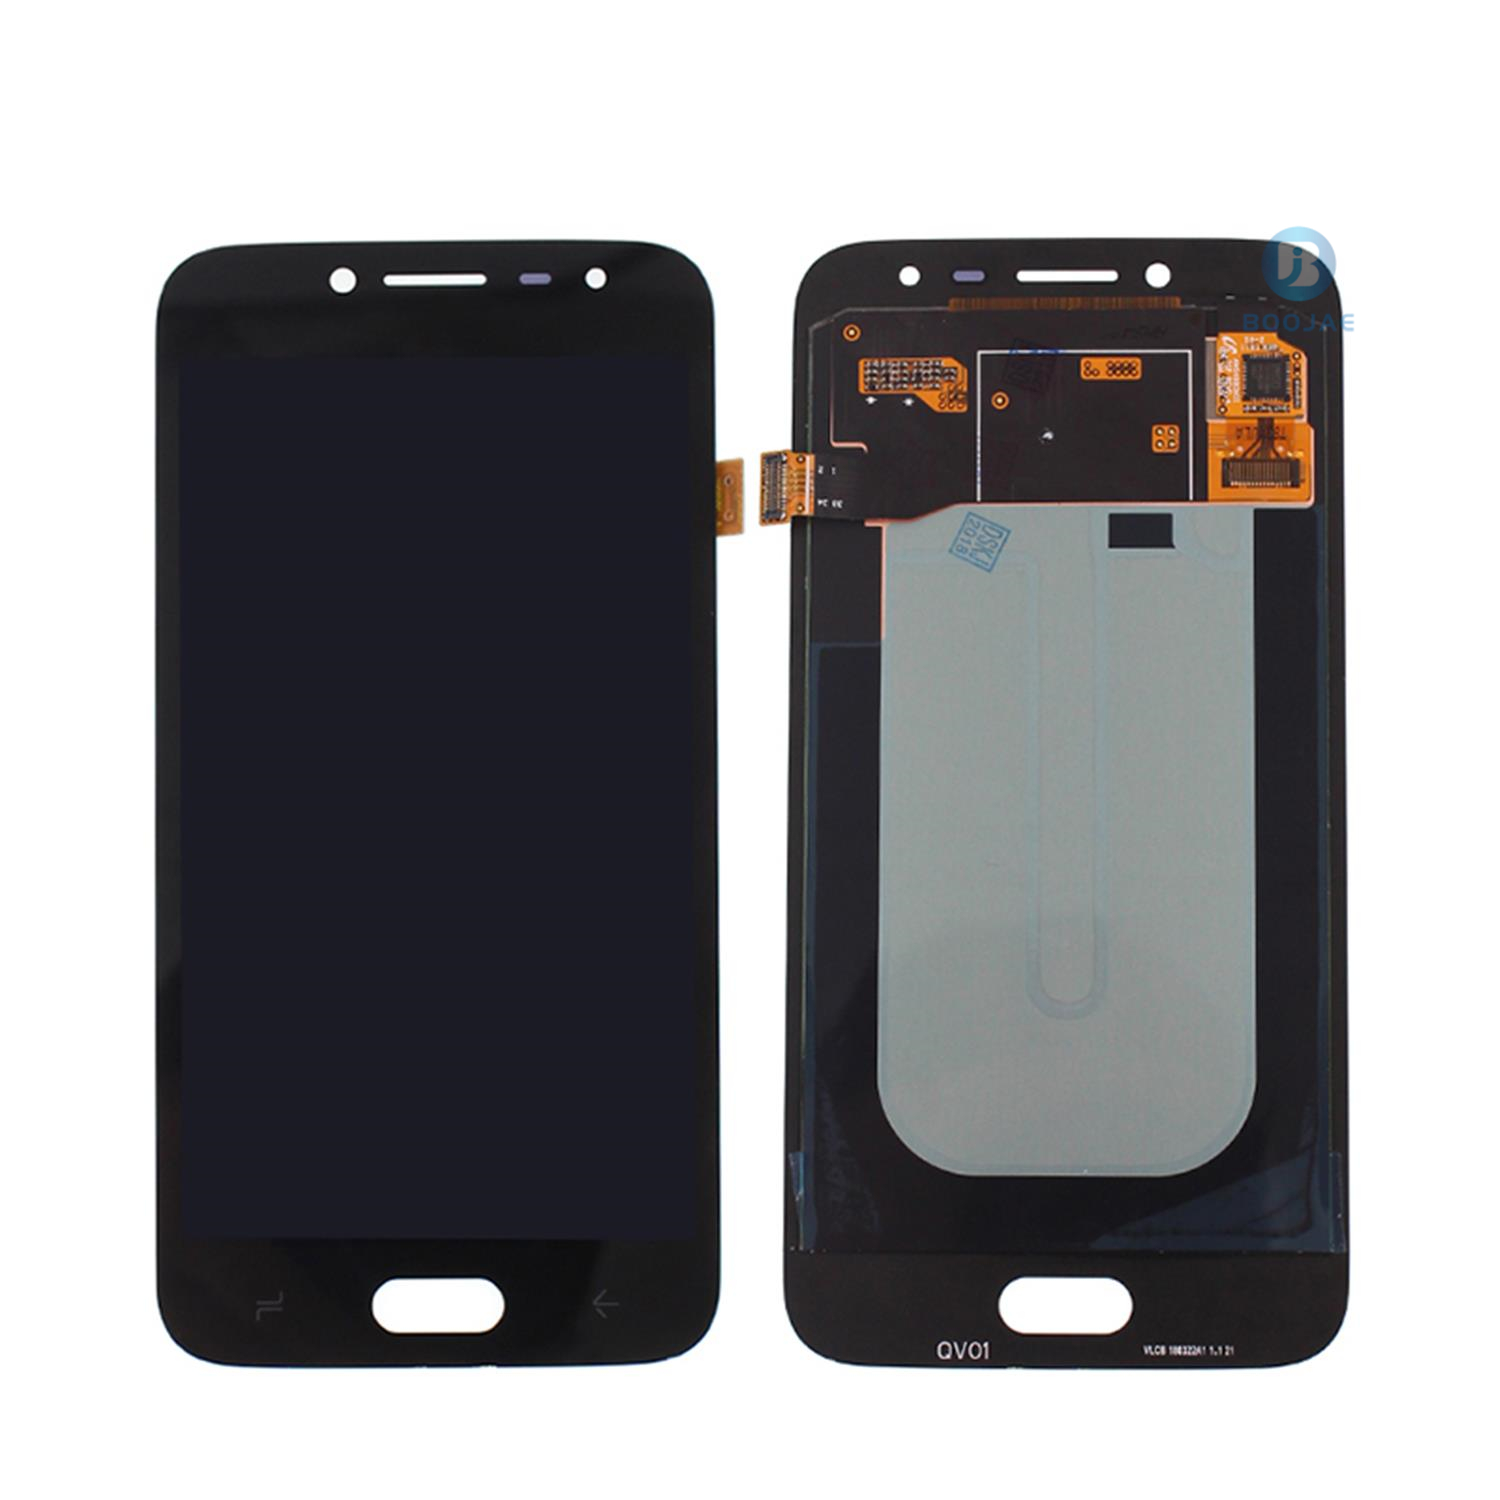 Samsung Galaxy J2 Pro LCD Screen Display and Touch Panel Digitizer Assembly Replacement